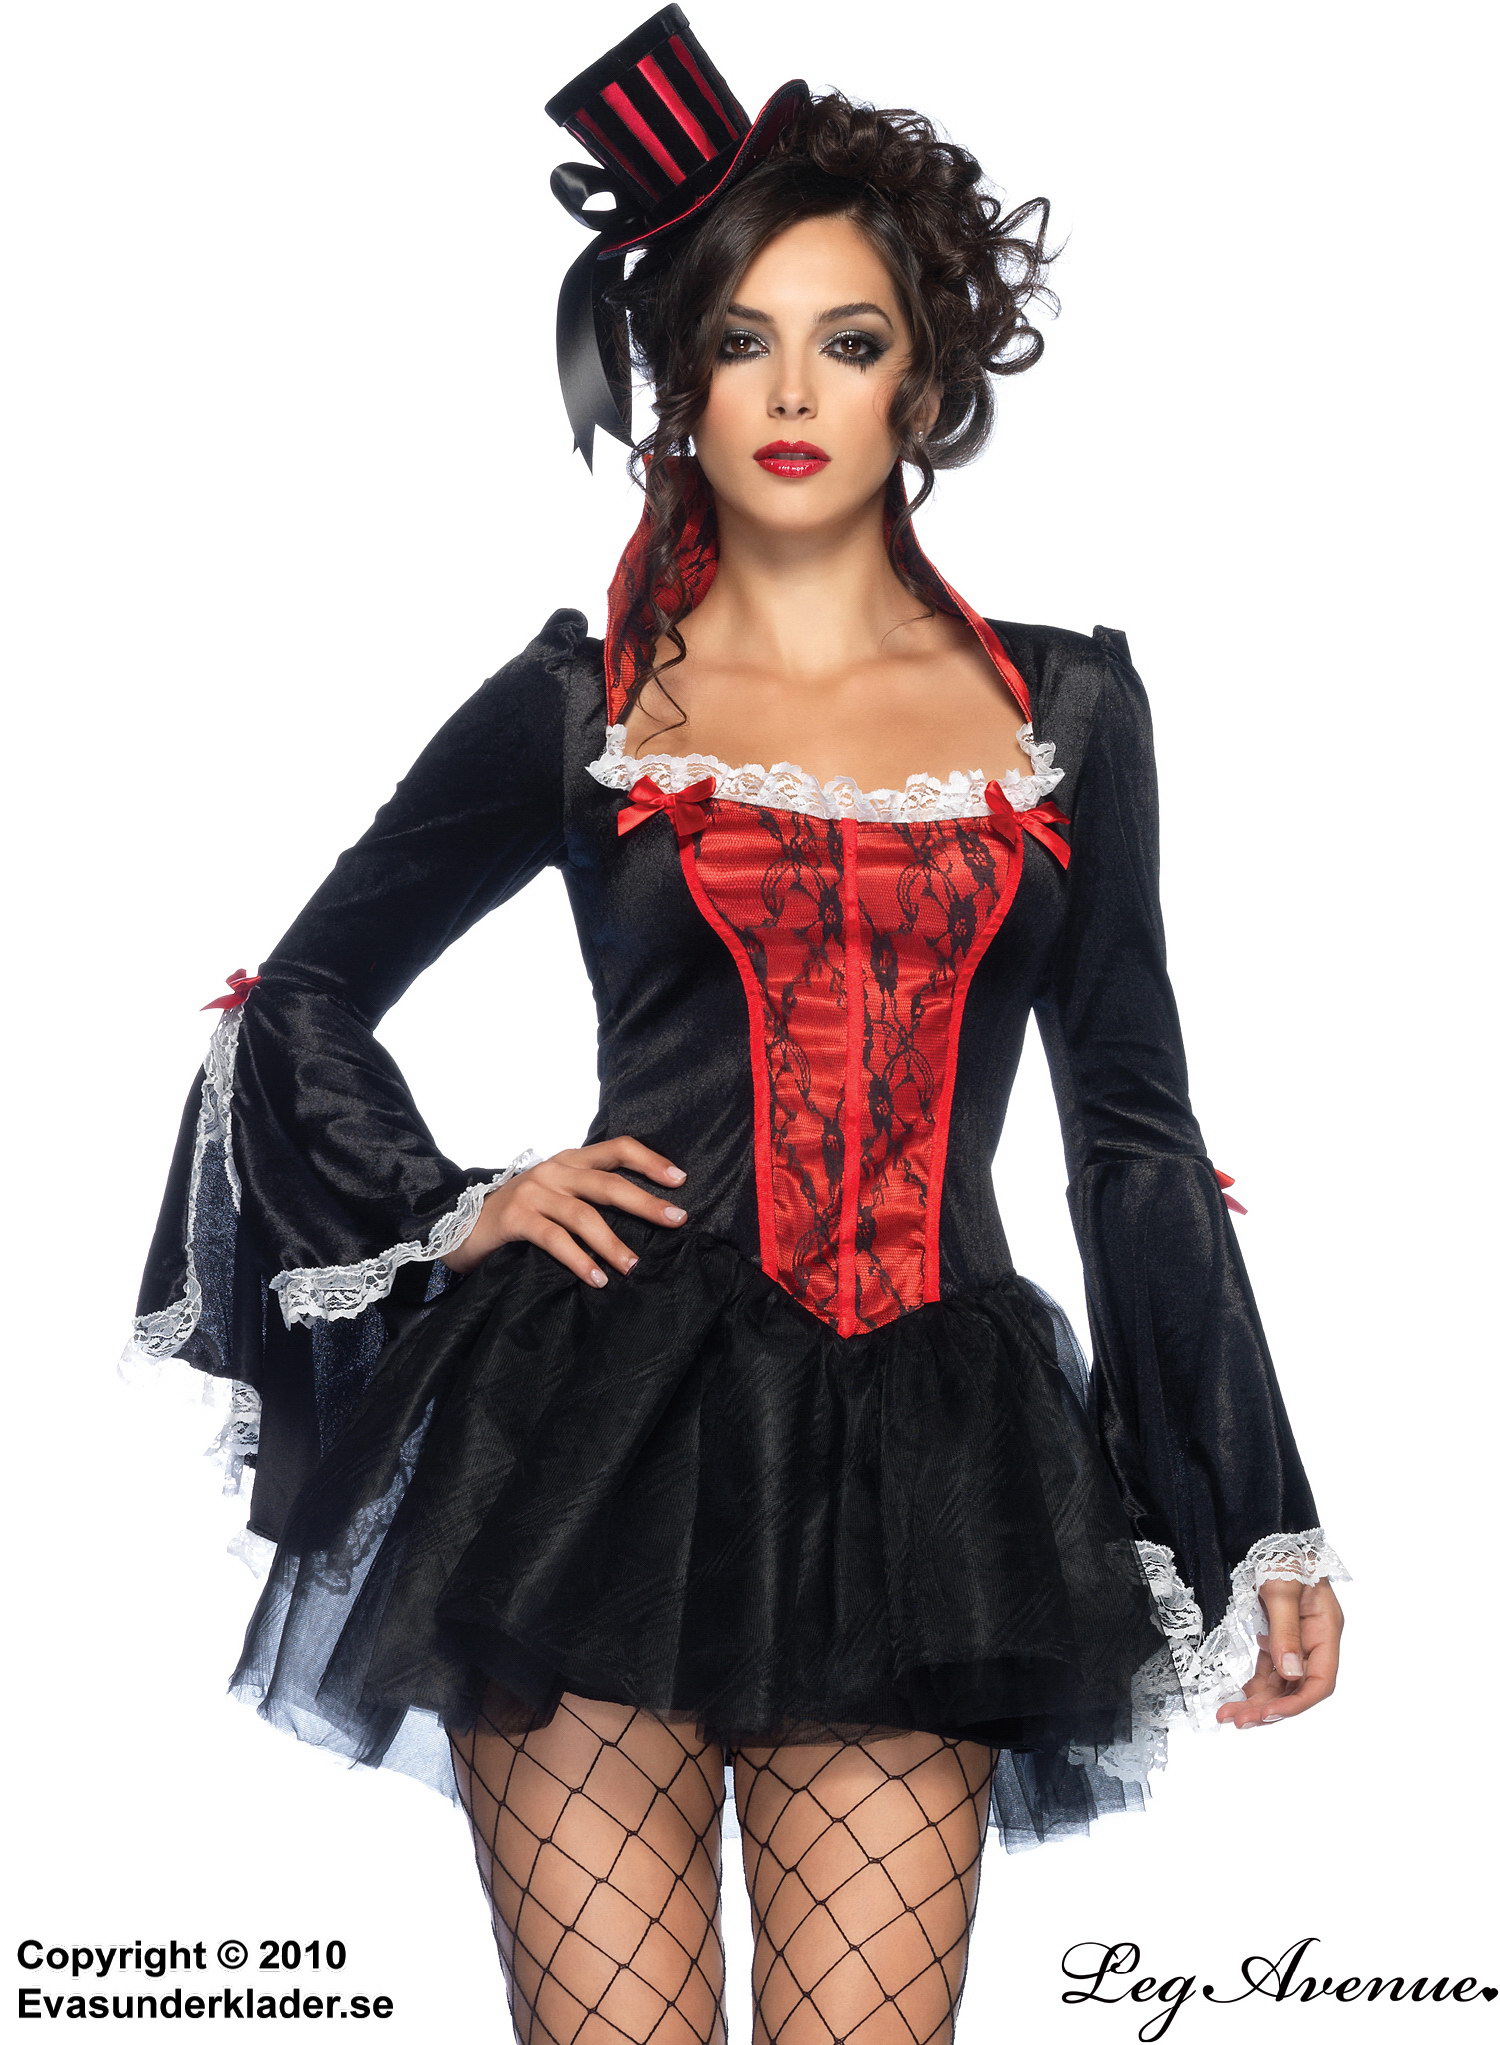 Witch, Devil, Vampire, costume is sold out or discontinued. 